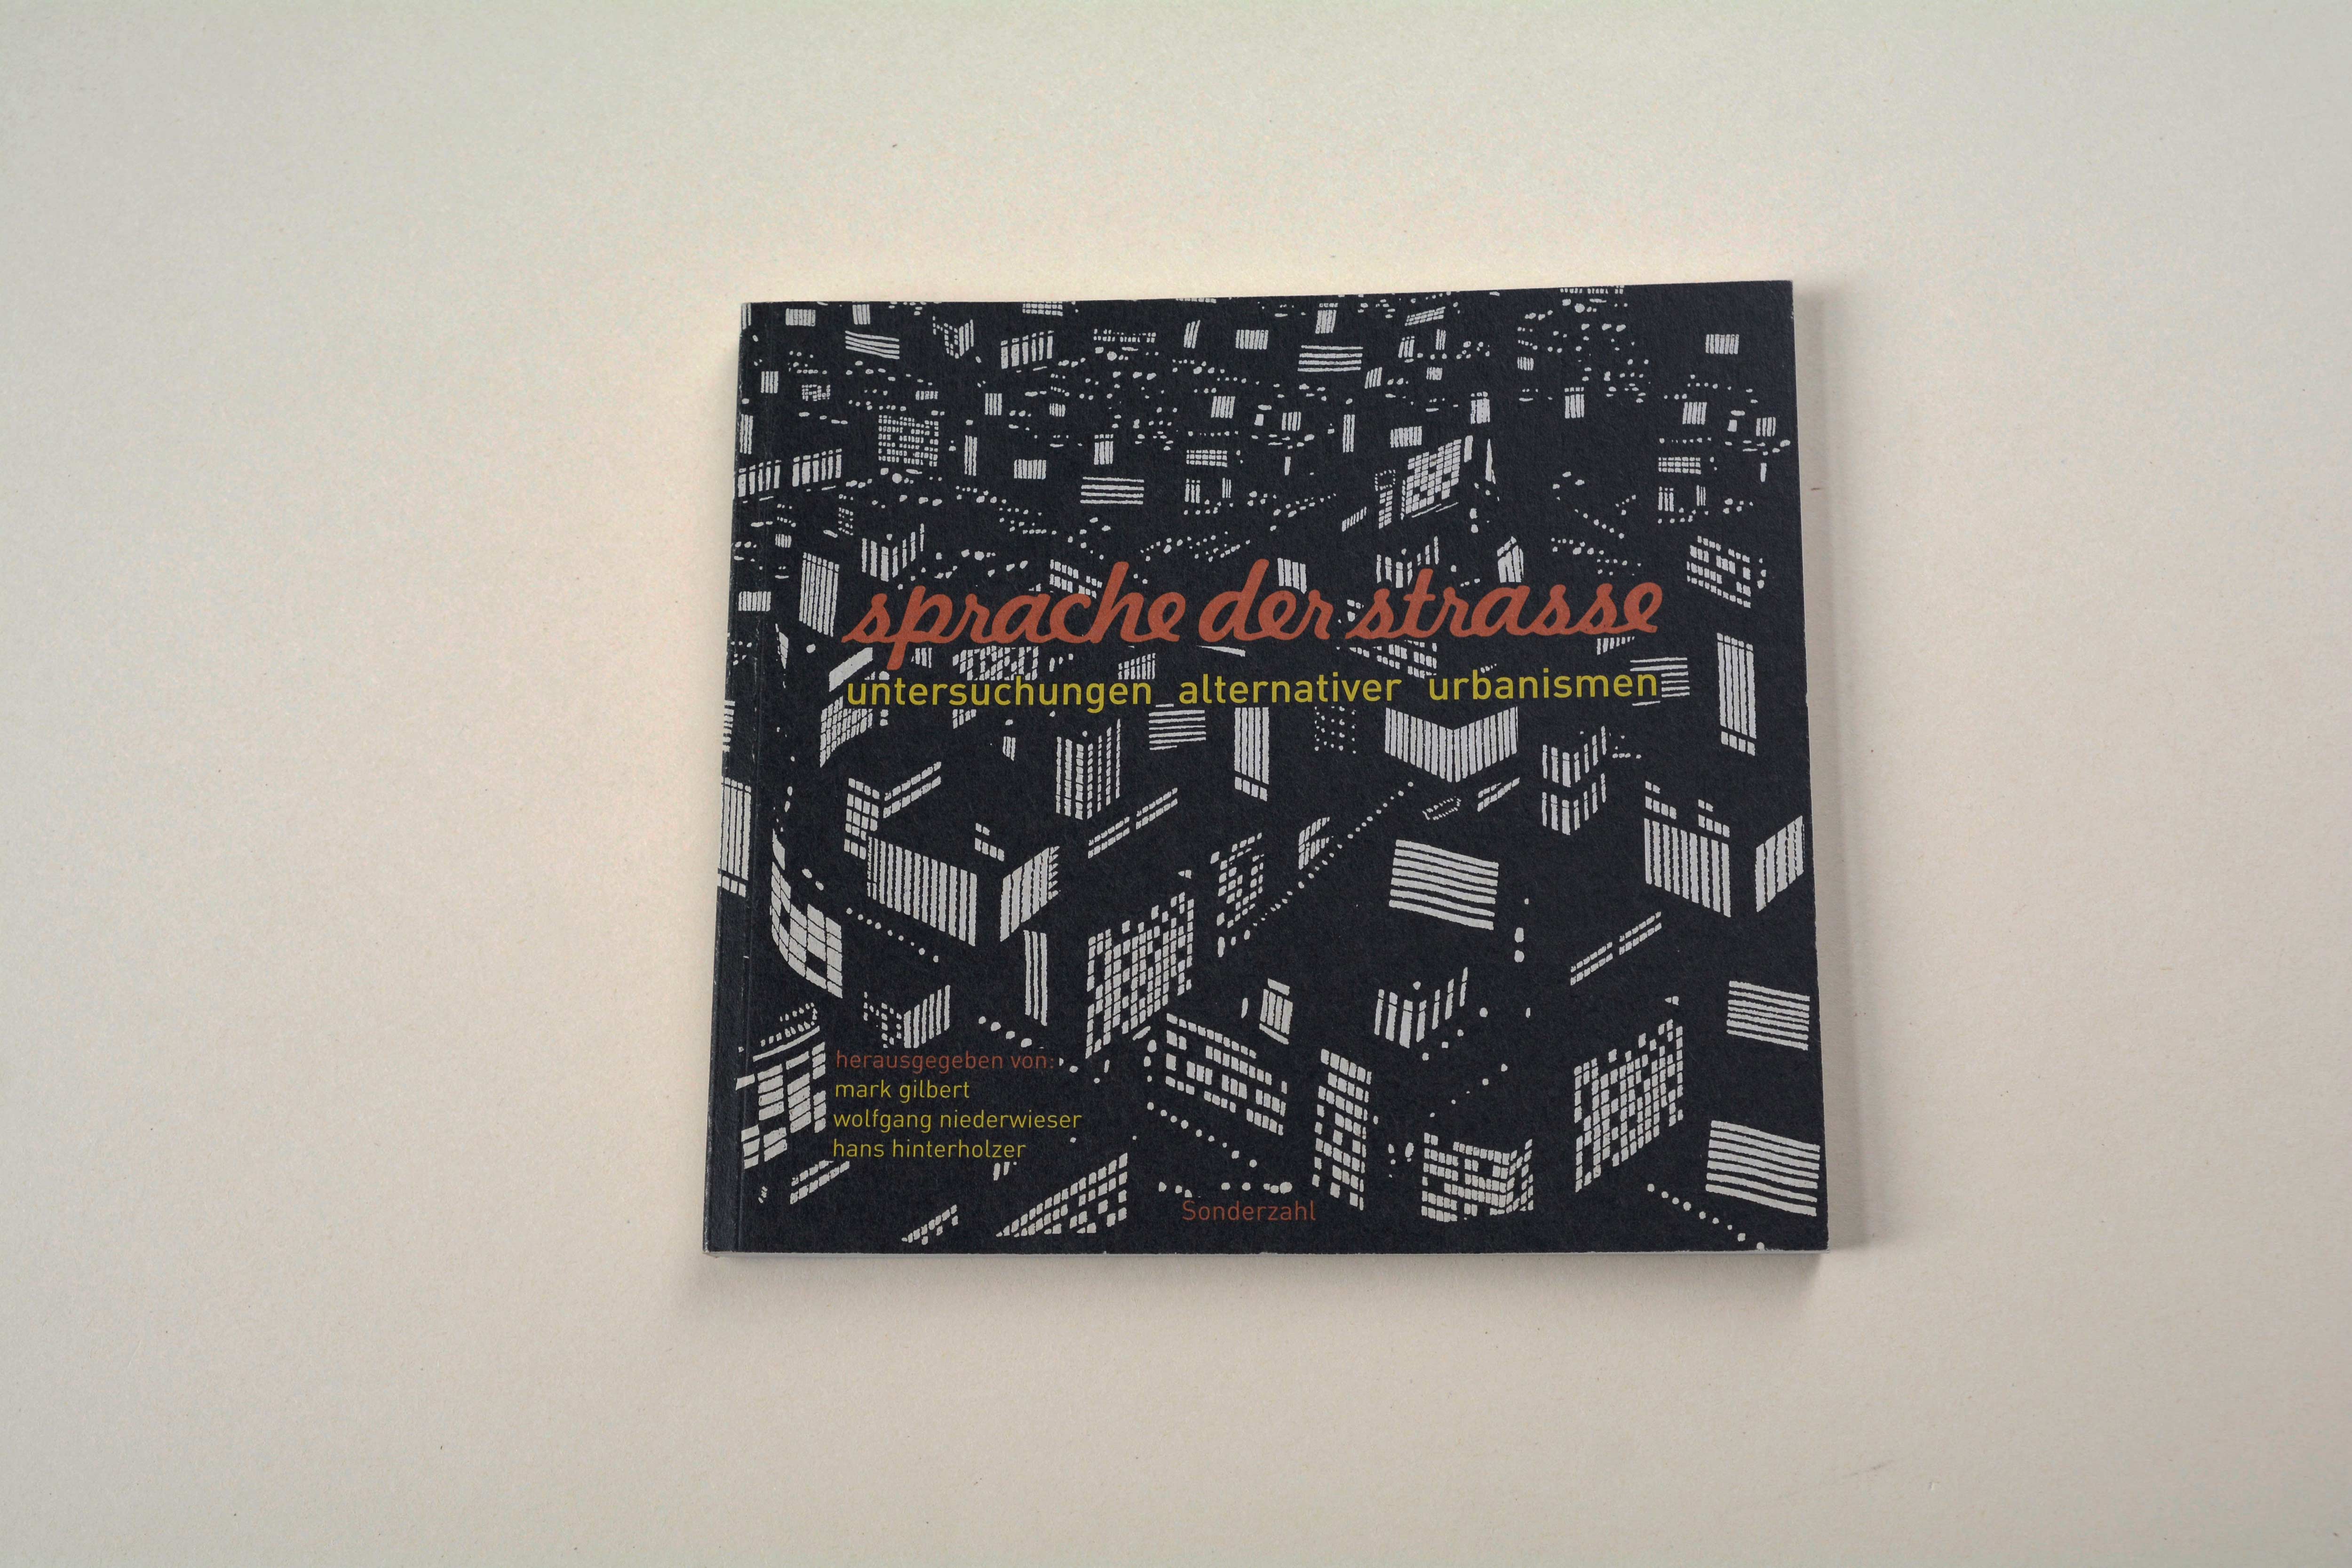 Cover catalogue. B/W illustration of city at night. Title in script font overlayed.